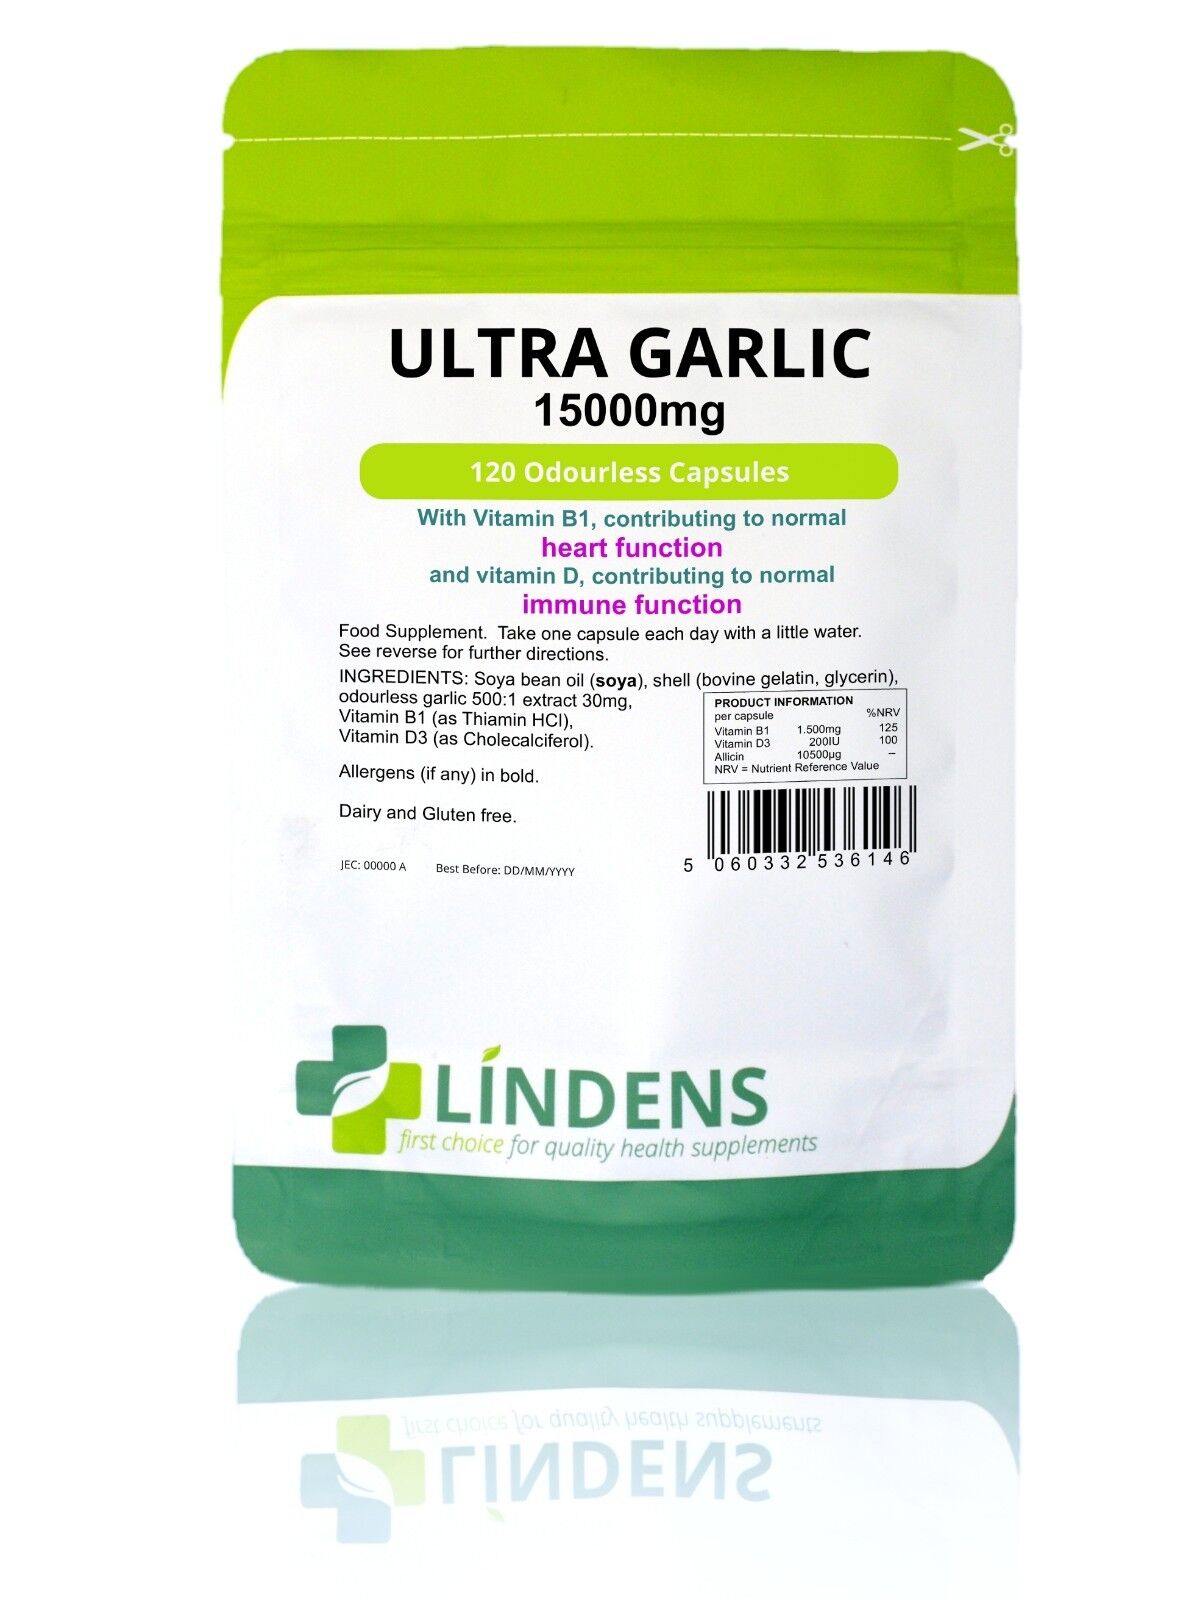 Lindens Ultra Garlic 15000mg 3-PACK 360 Odorless Capsules with Vitamin D3 and B1